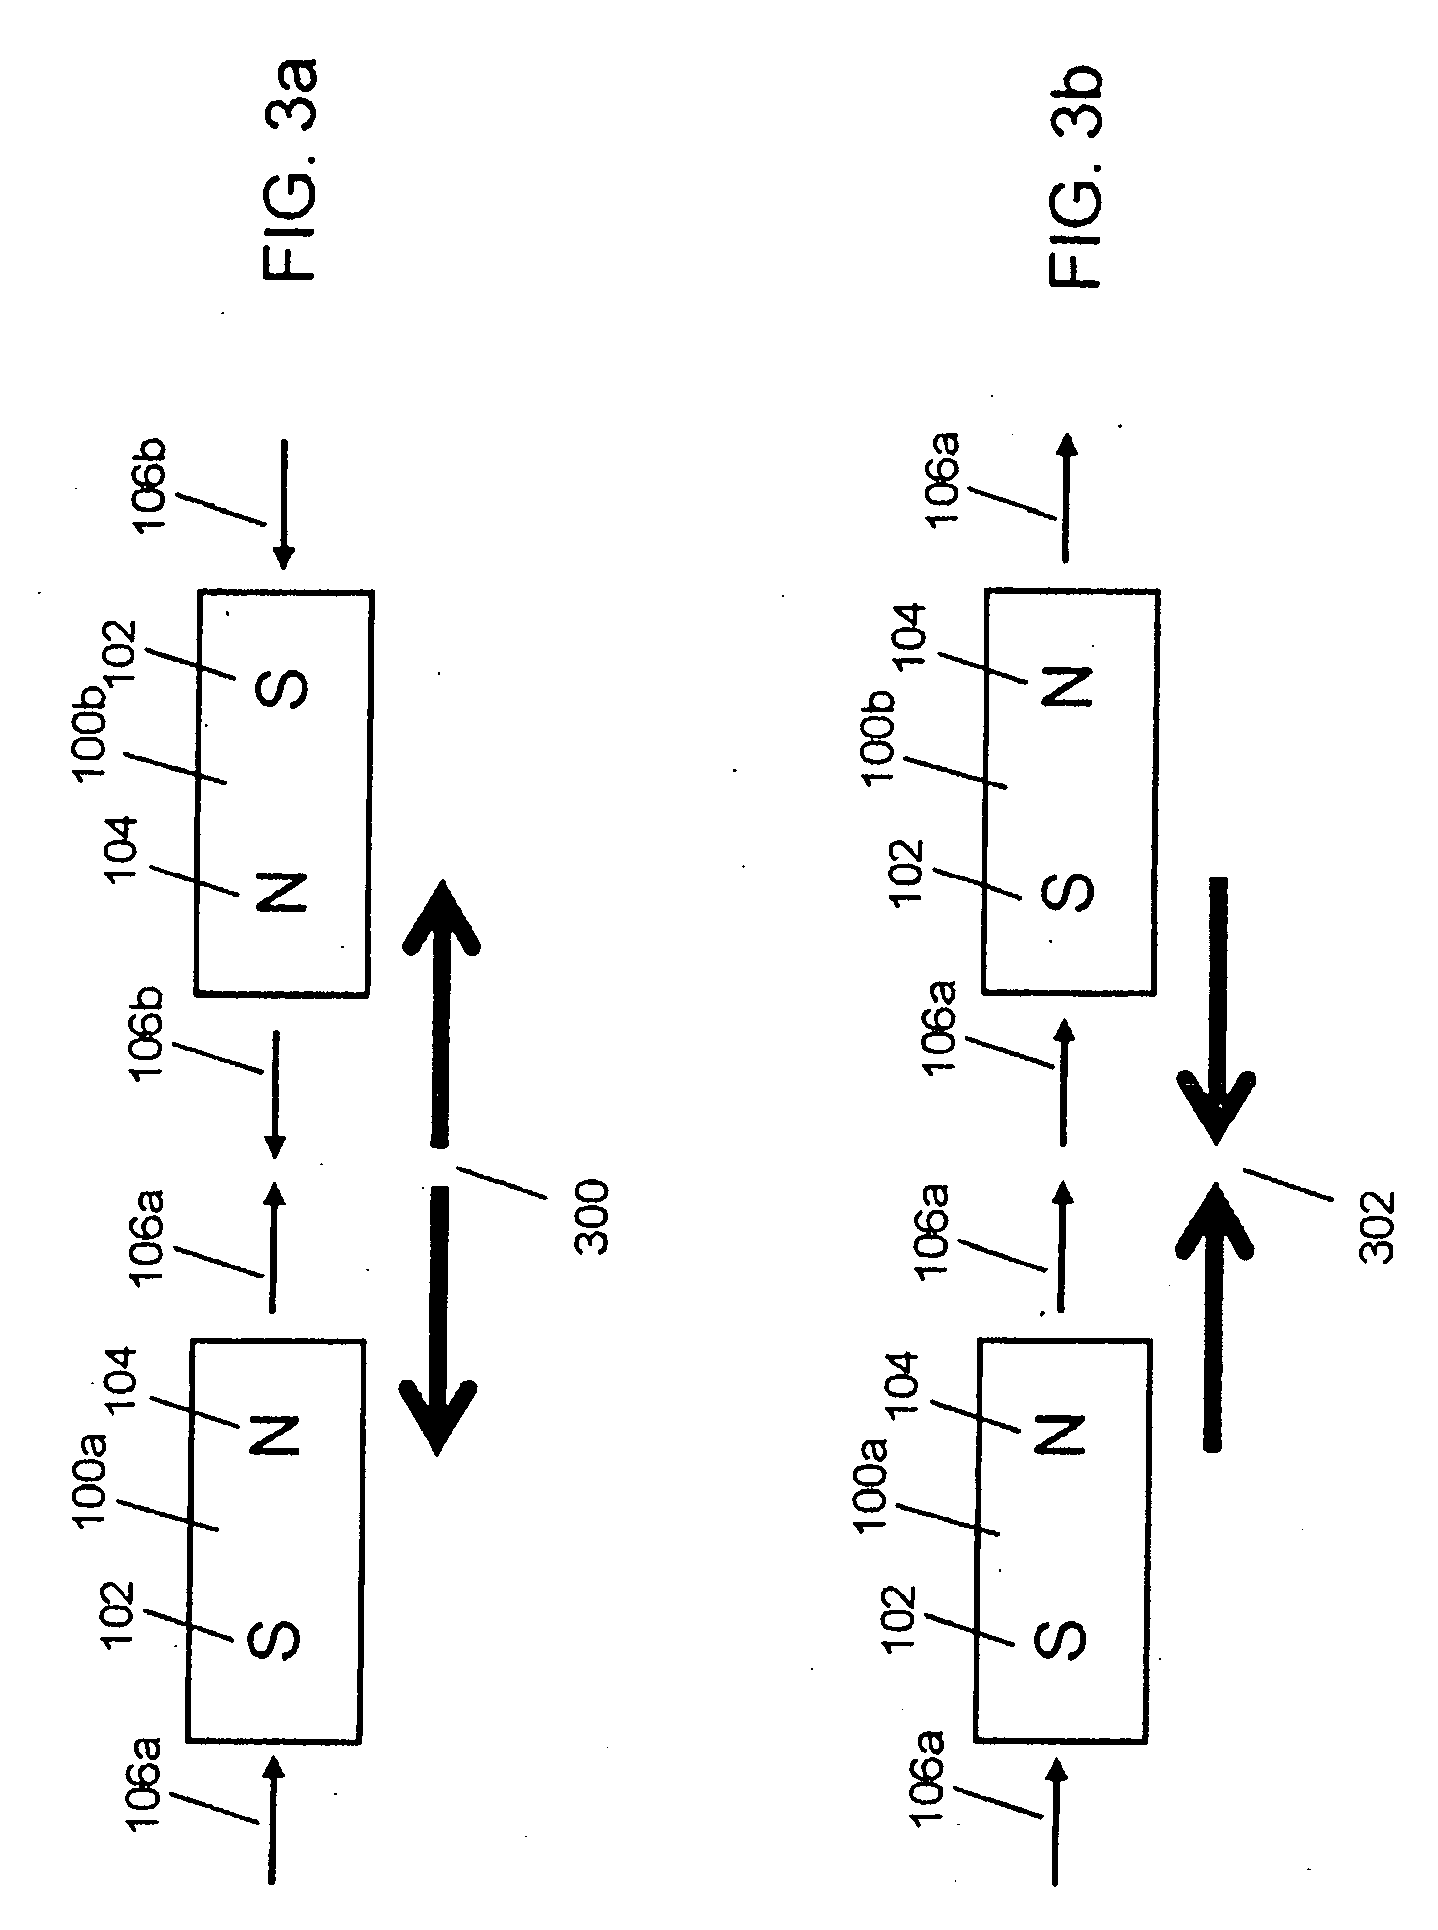 System and method for affecting field emission properties of a field emission structure